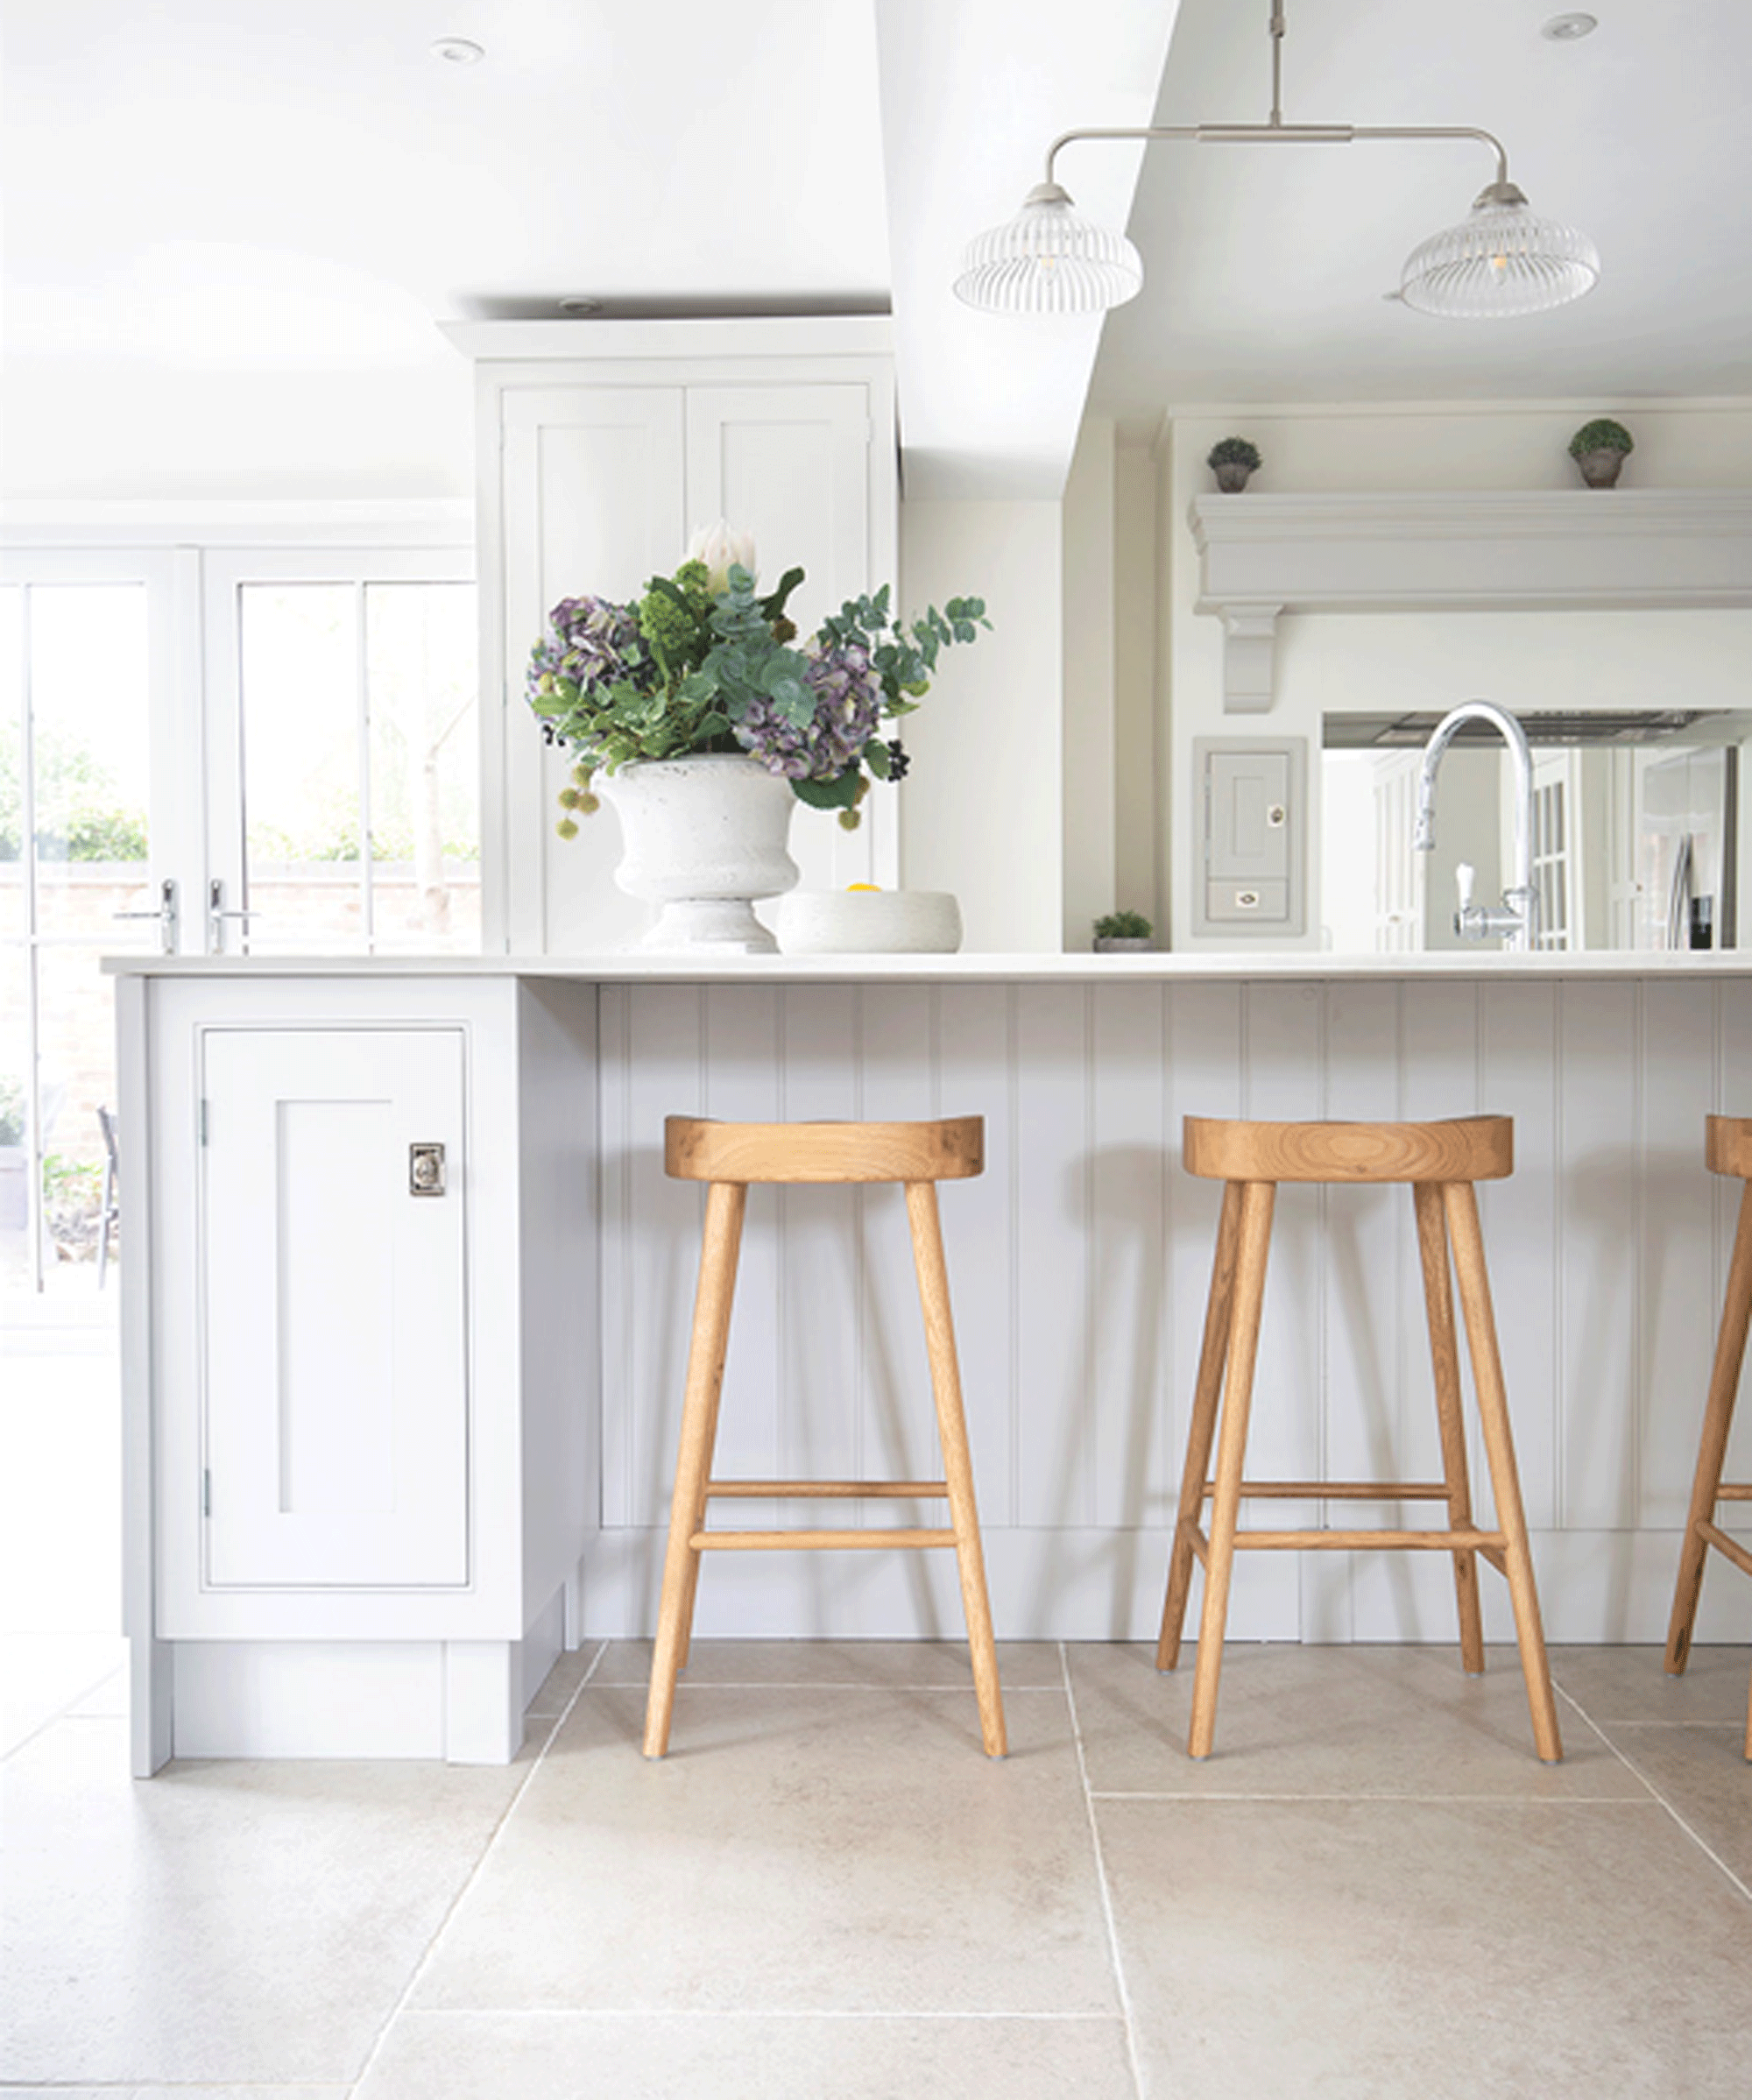 White kitchen island with wooden stools